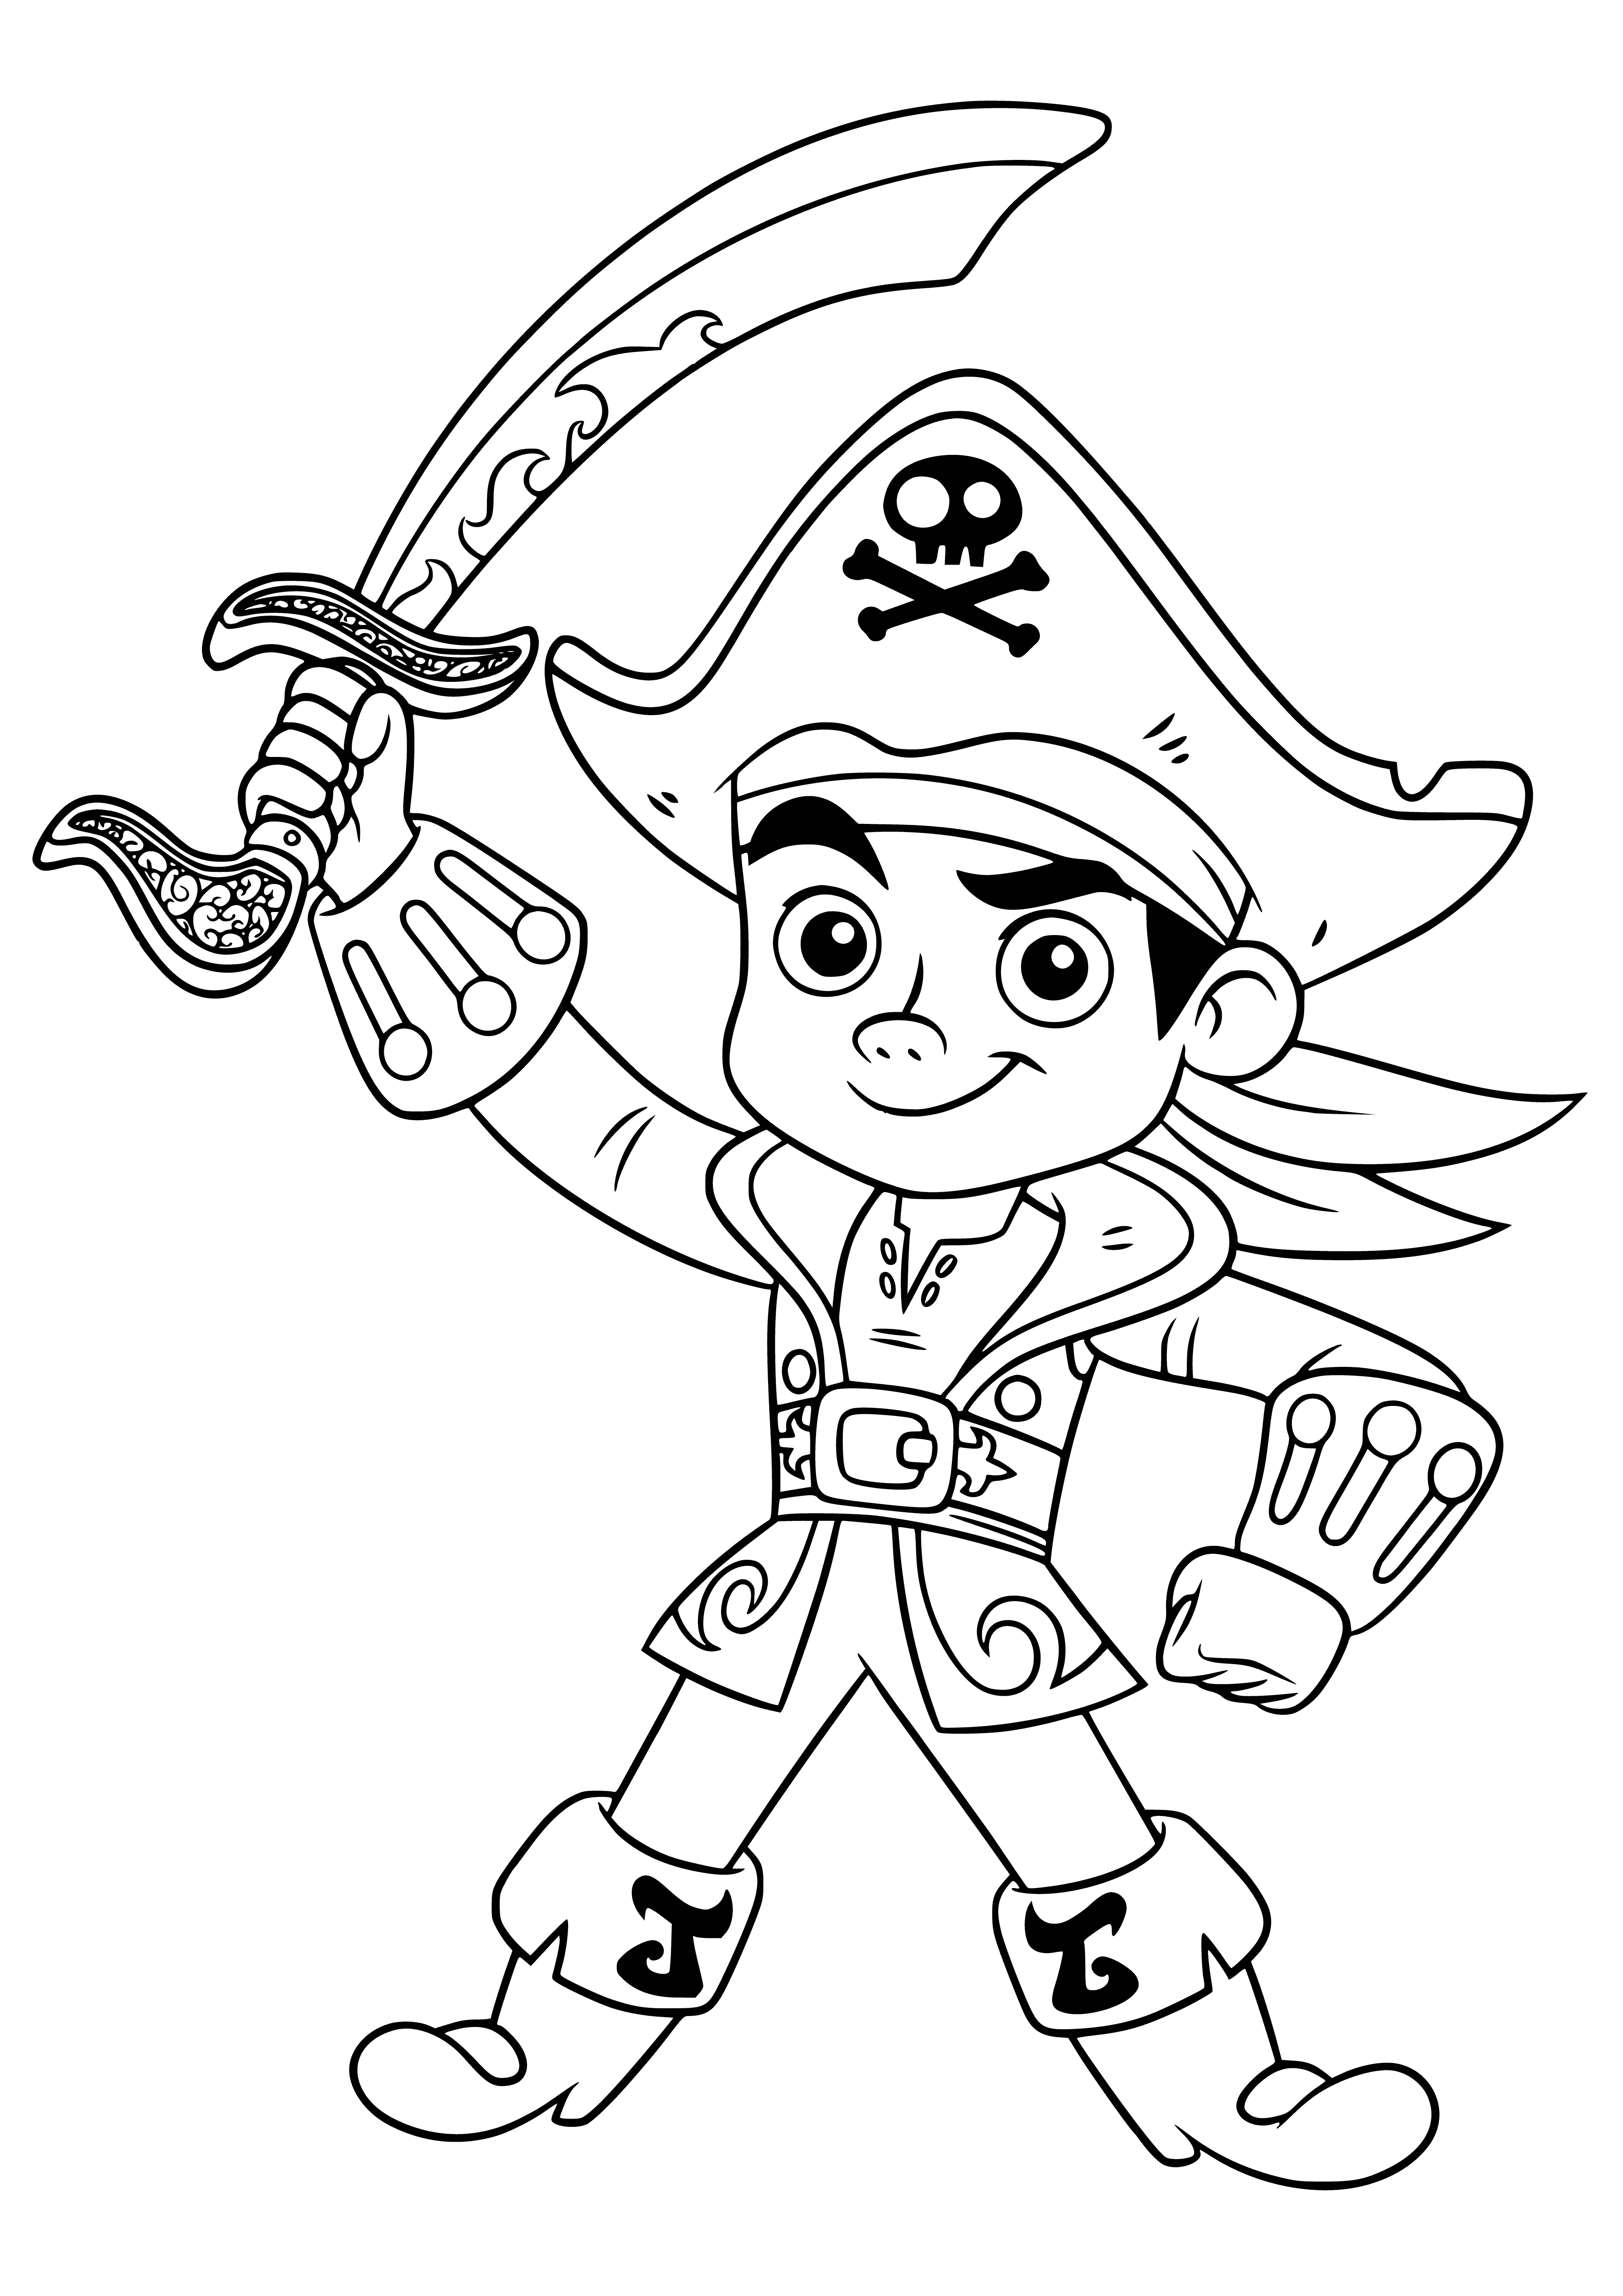 coloring page: A boy w/ light brown skin & black hair stands on a beach in front of a green pirate ship w/ a treasure chest. He wears a red bandana & shirt, brown pants, & a gold hook for his right hand. #Pirates #Treasure